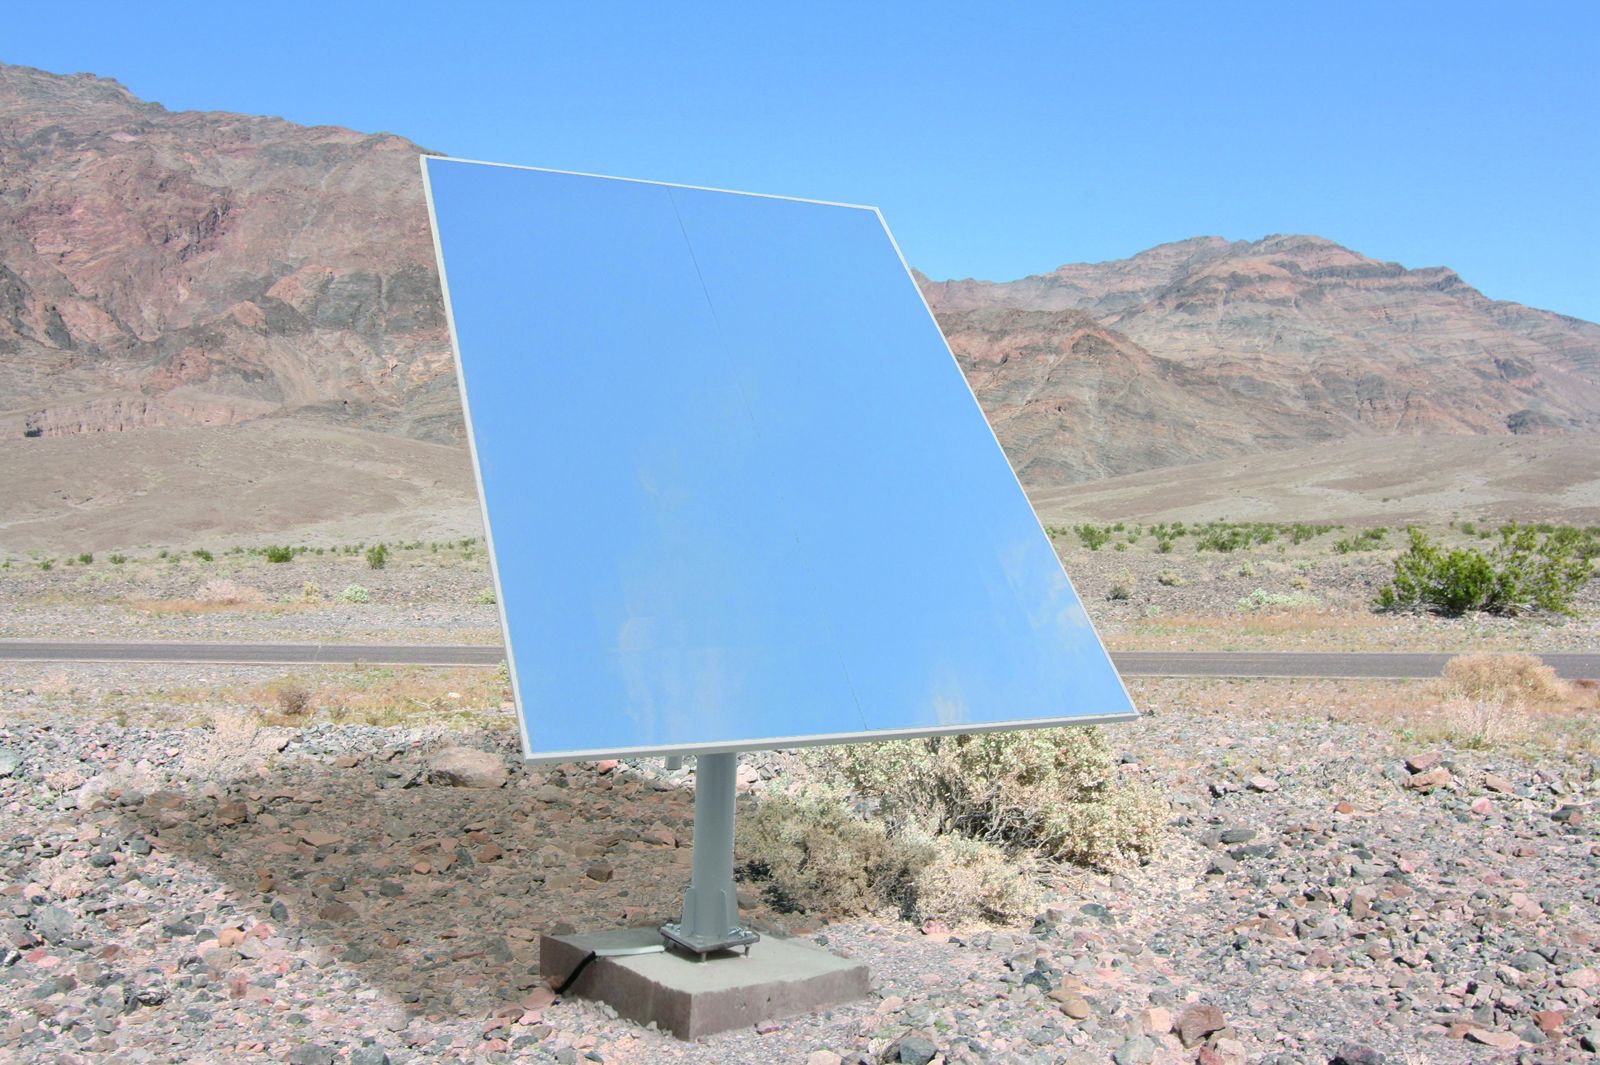 Heliostat prototype of partner company Solar Tower Technologies AG that allows for a very compact heliostat field design due to its proprietary mechanics and tracking. 